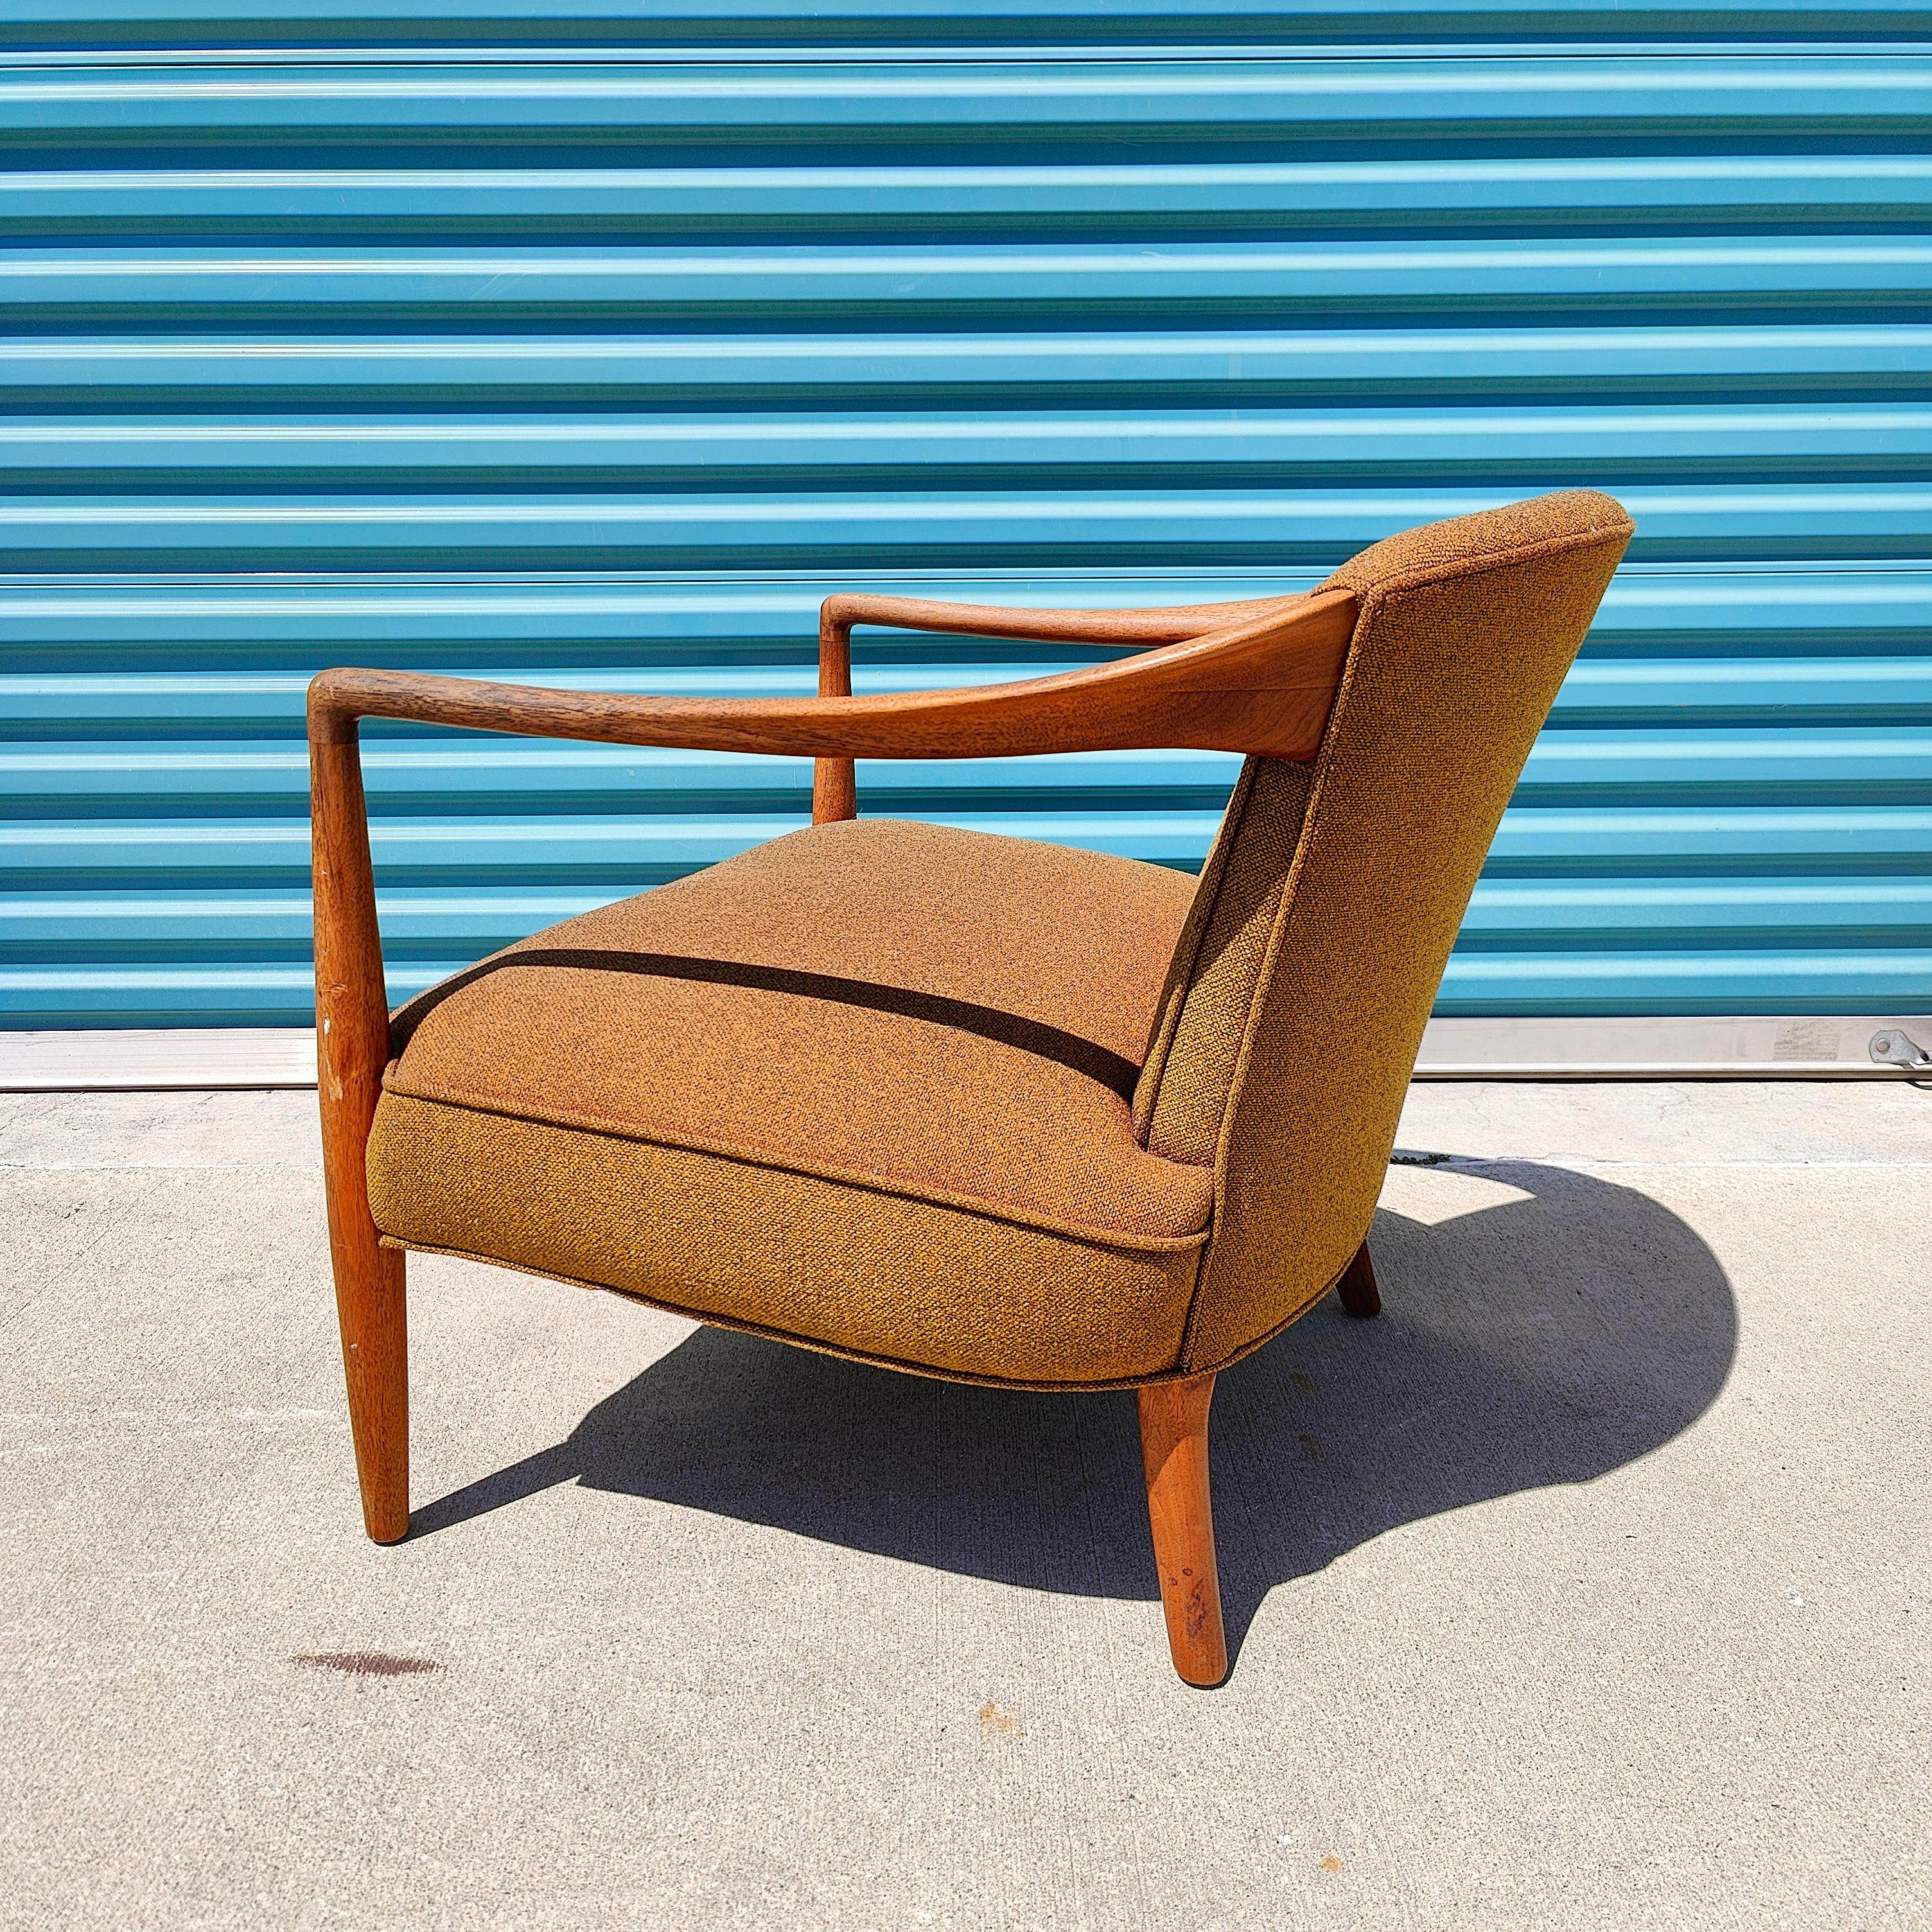 Just in, a sculptural walnut arm chair in original condition. Sleek and curvaceous. Unknown manufacturer but in the manner of, well, all the renowned Danish designers specifically Finn Juhl and Ib Kofod-Larsen. 27.5w x 23d x 27t with a seat height